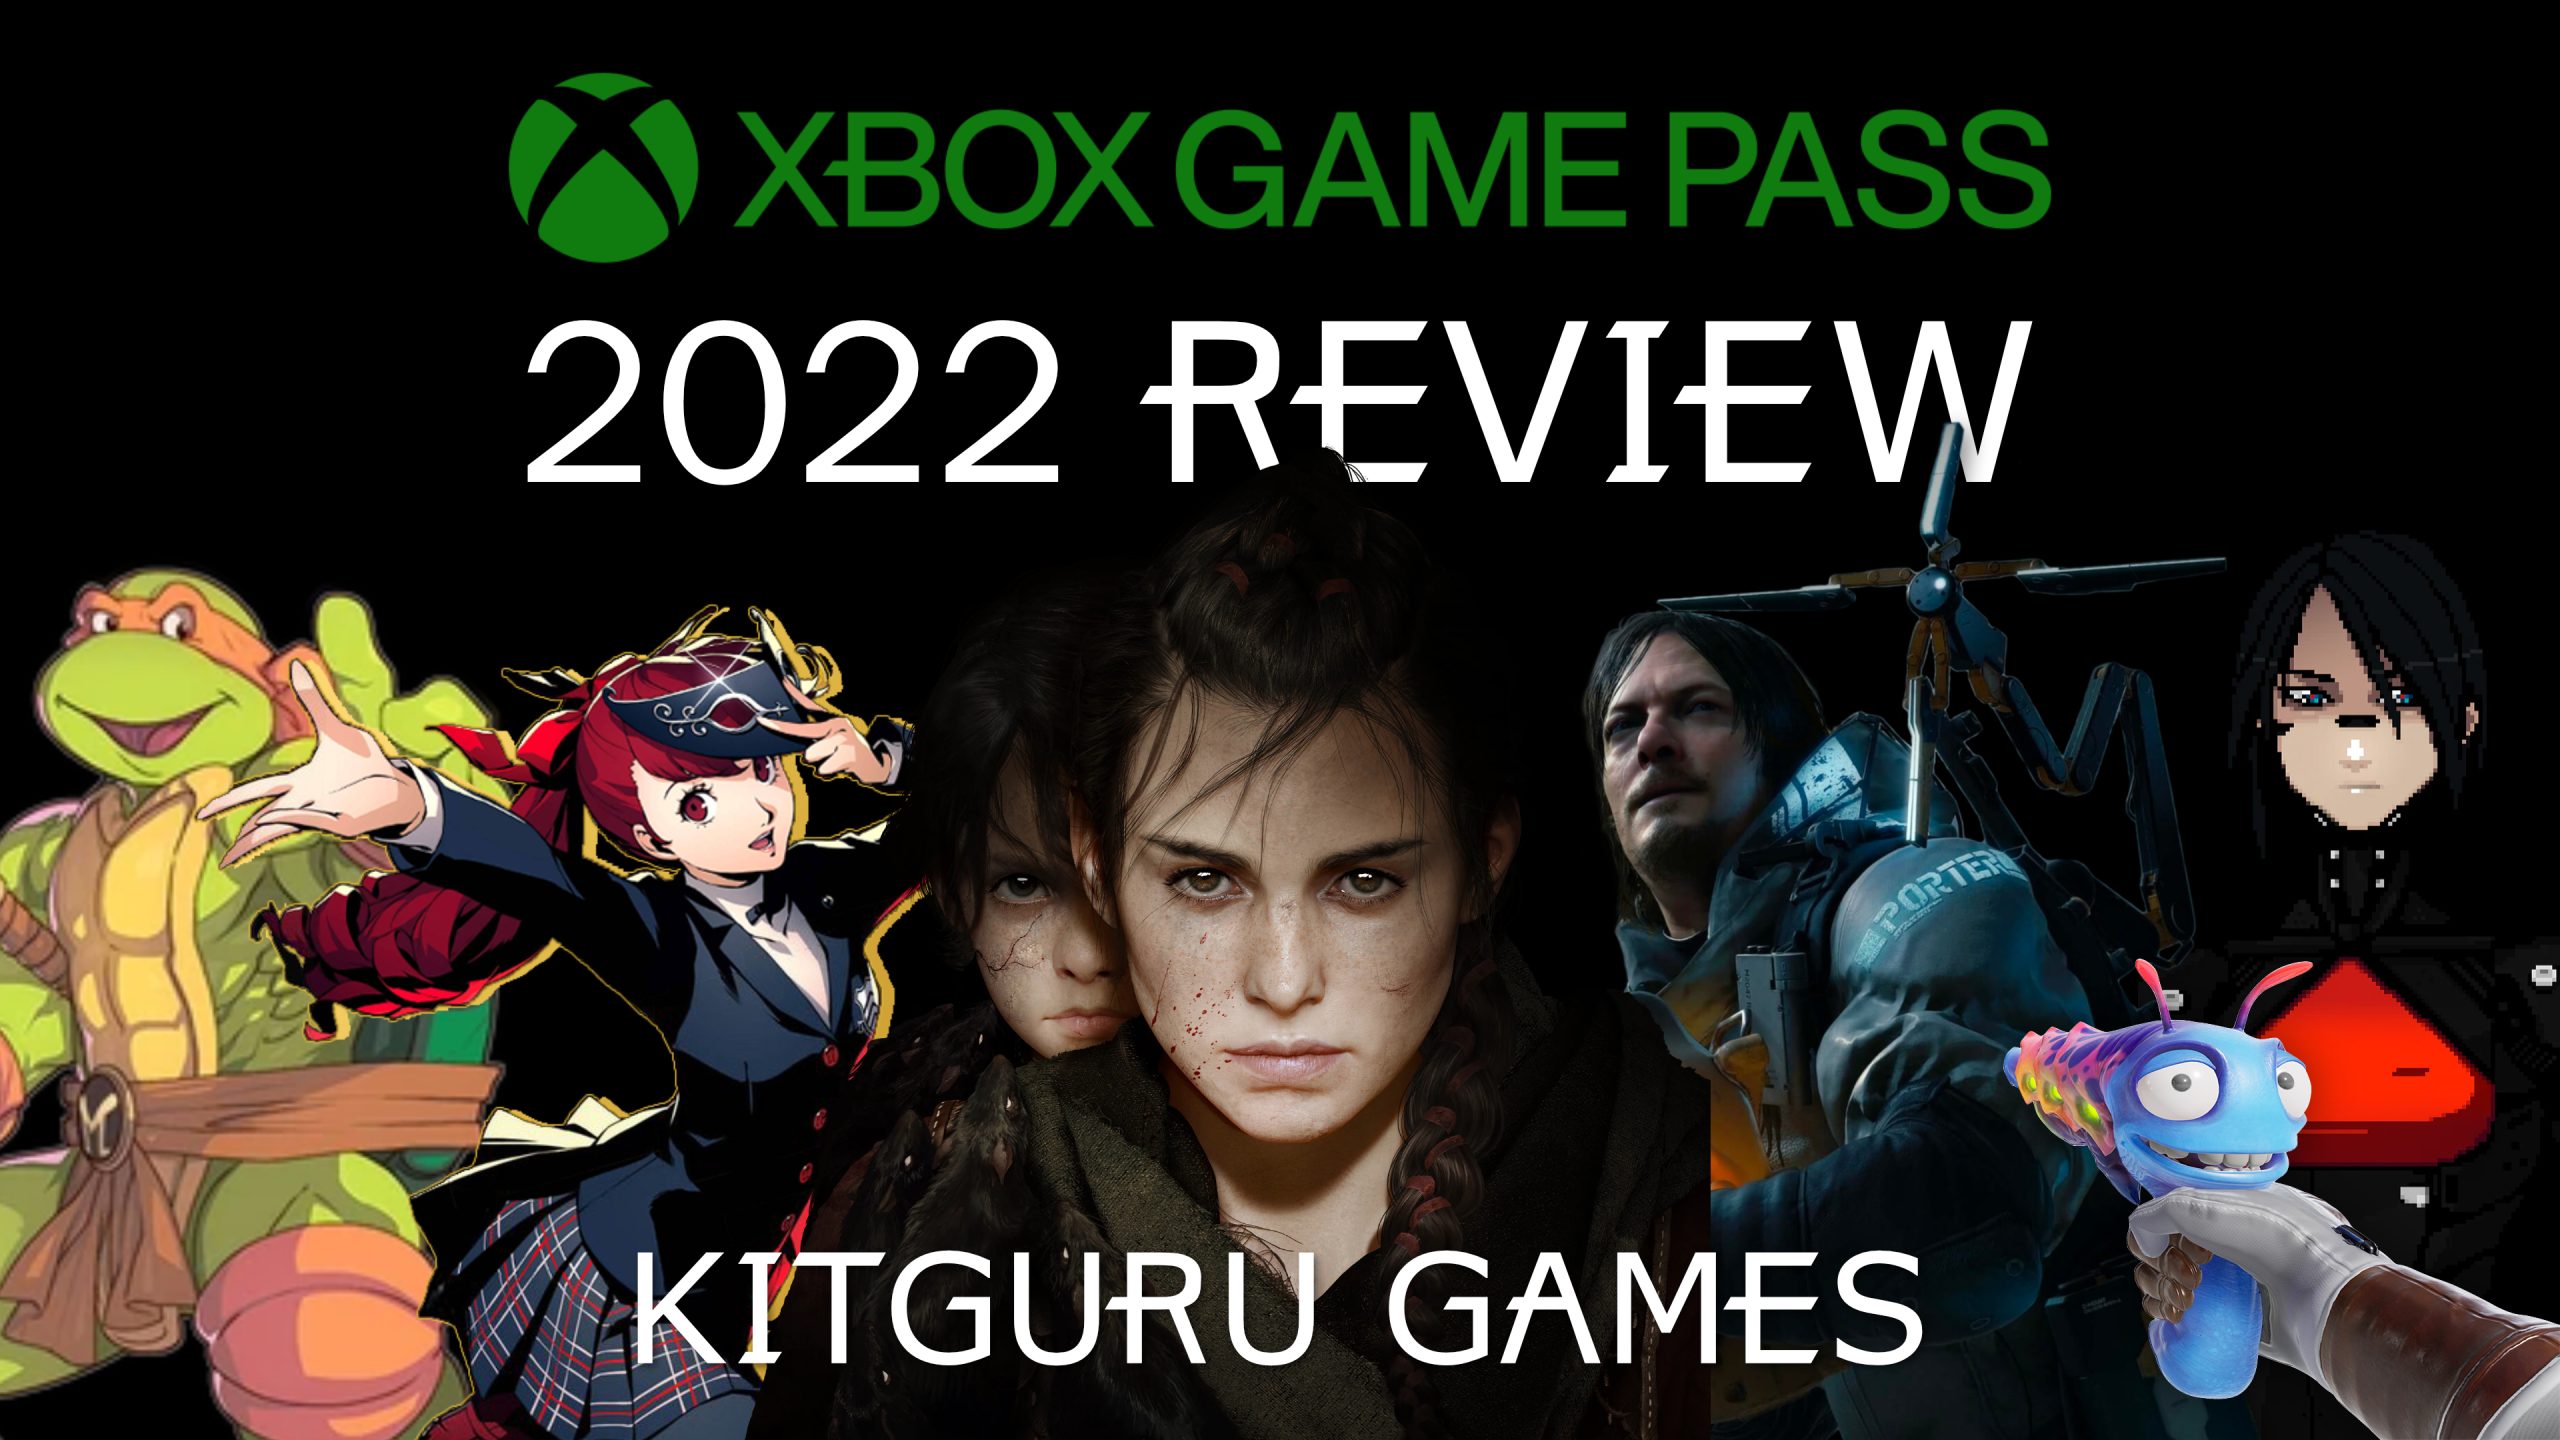 Xbox Game Pass Adds Far Cry 5, FIFA 22, More in Late June; 3